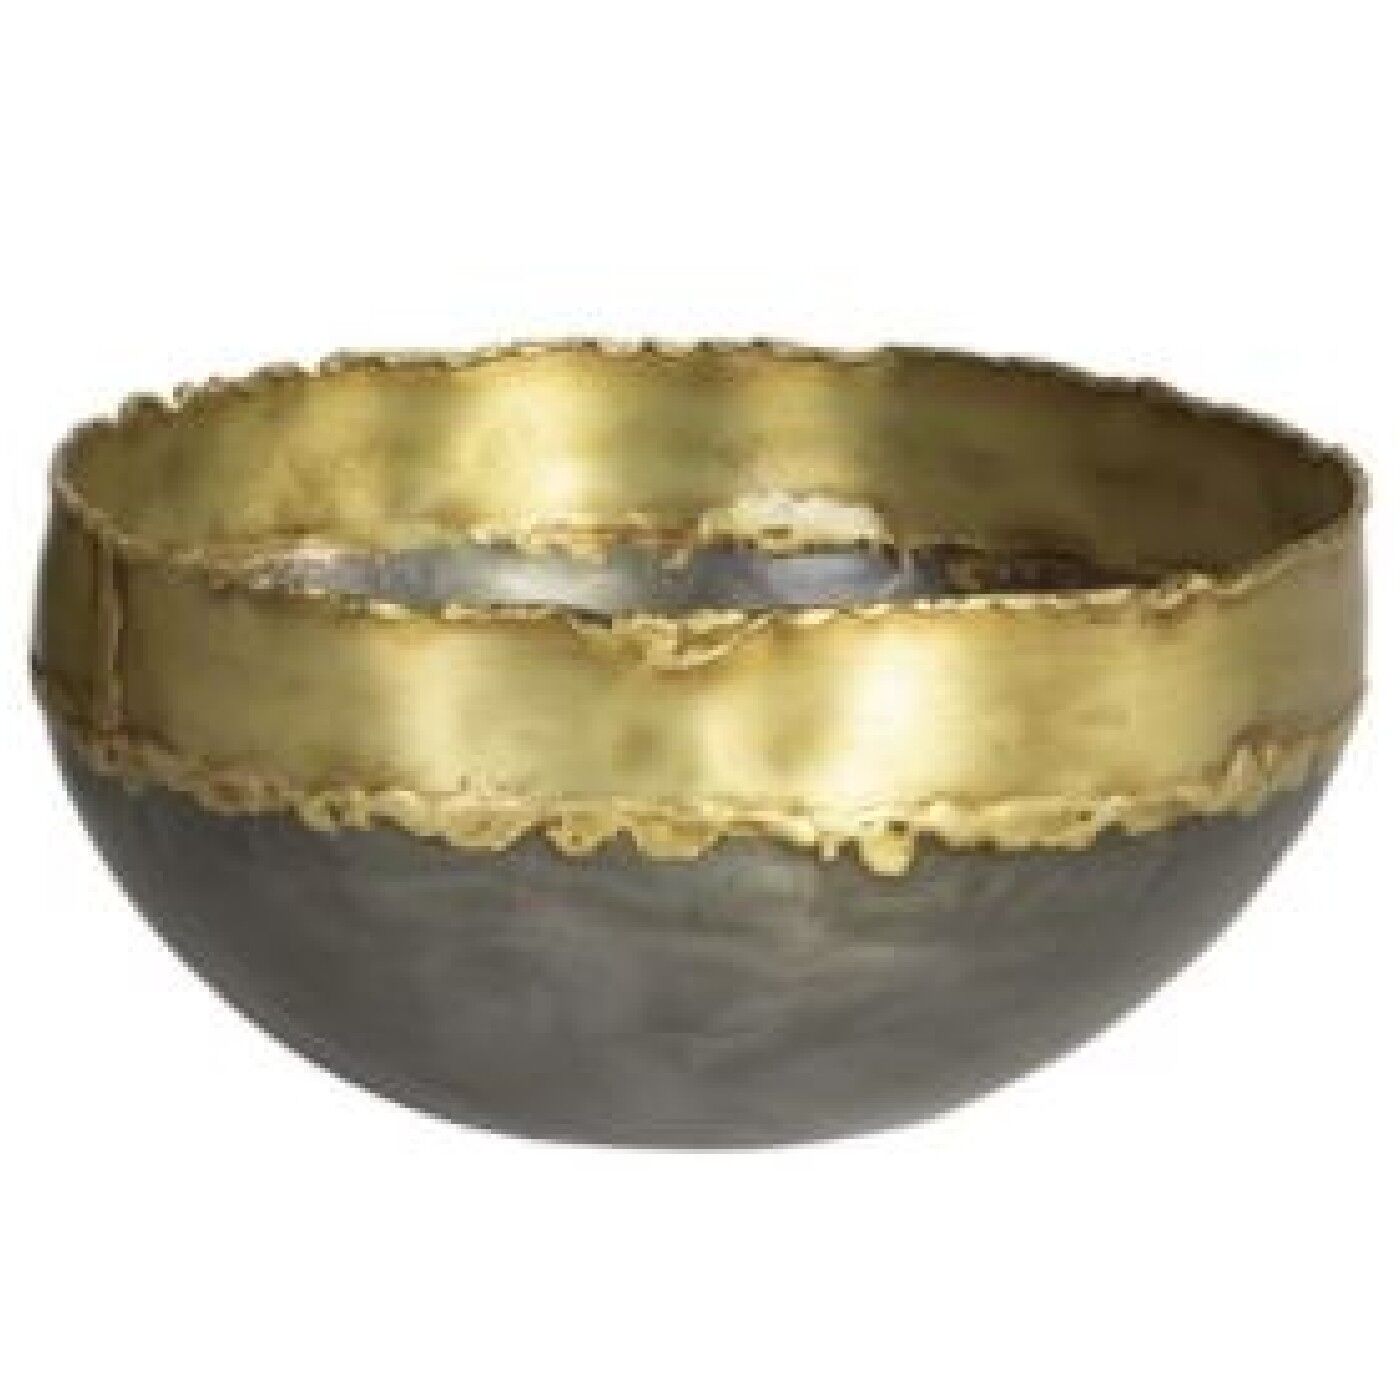 Small Handmade Sheet Steel Bowl in Satin Lacquer Finish w/Brass Detailing. 1